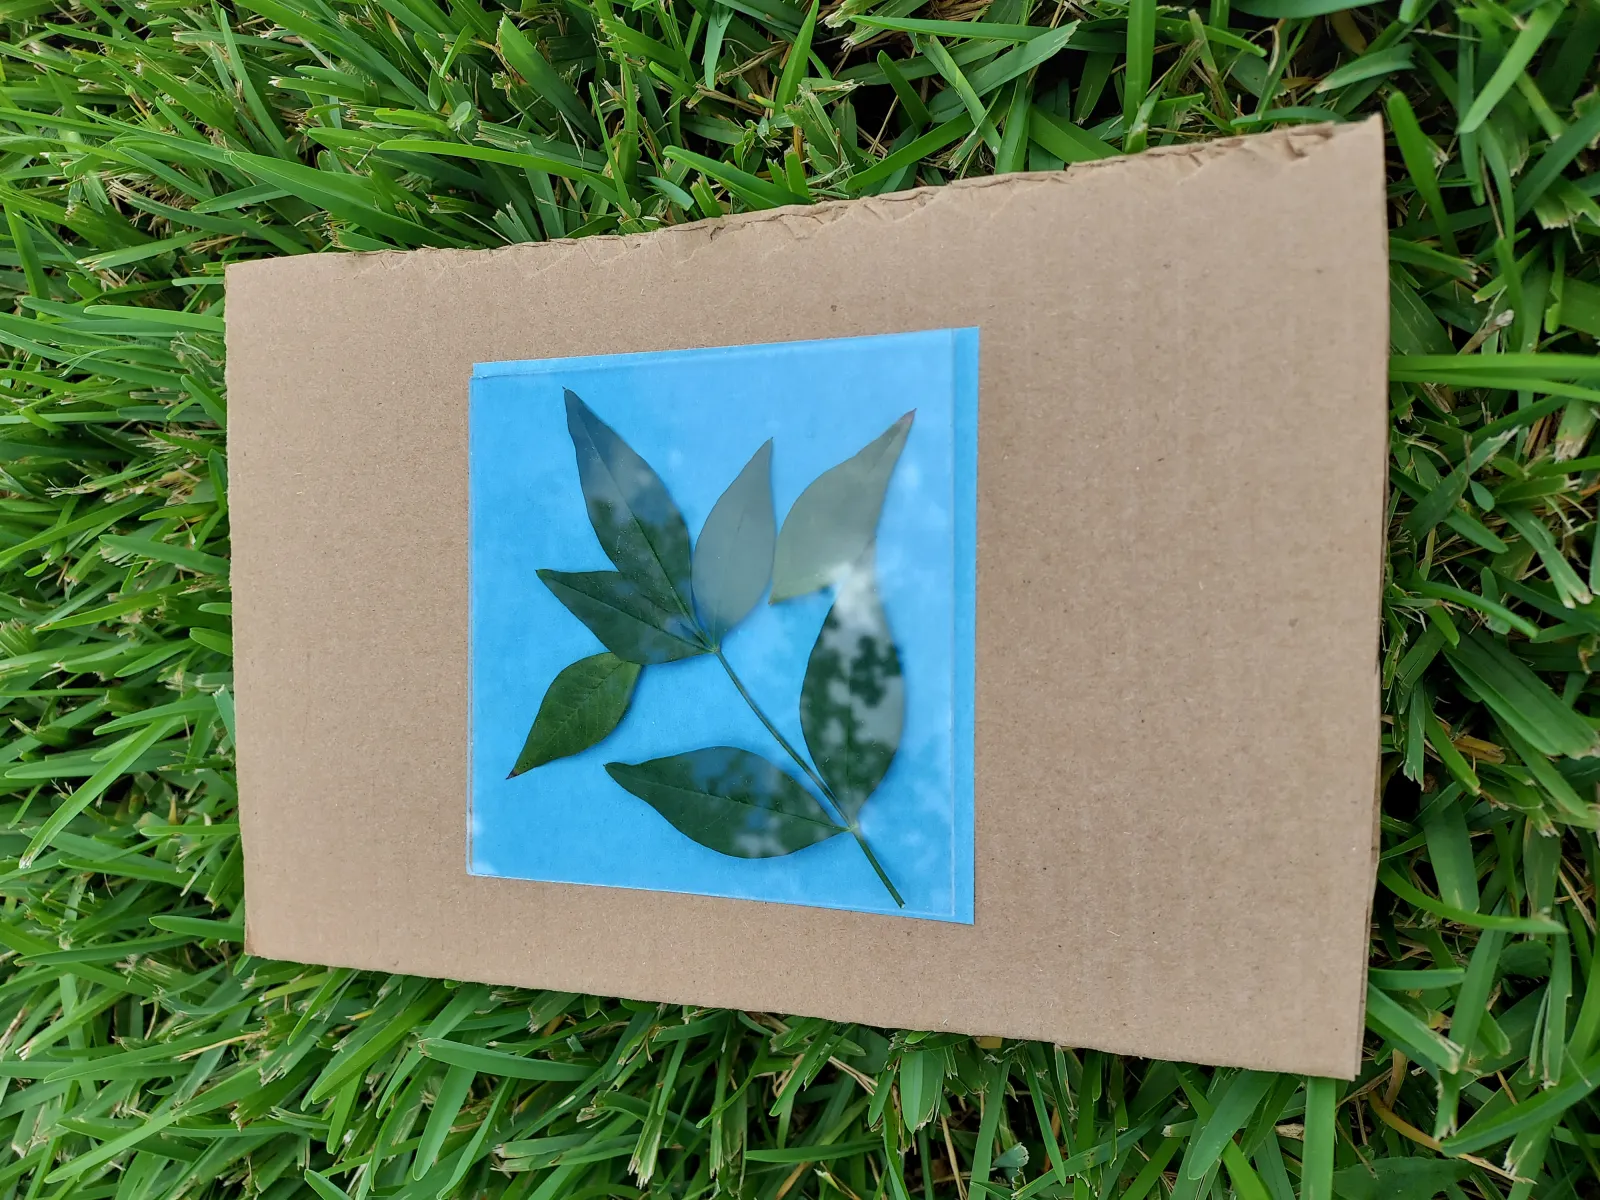 Image of sun print paper developing with an arrangement of Nandina leaves on top.